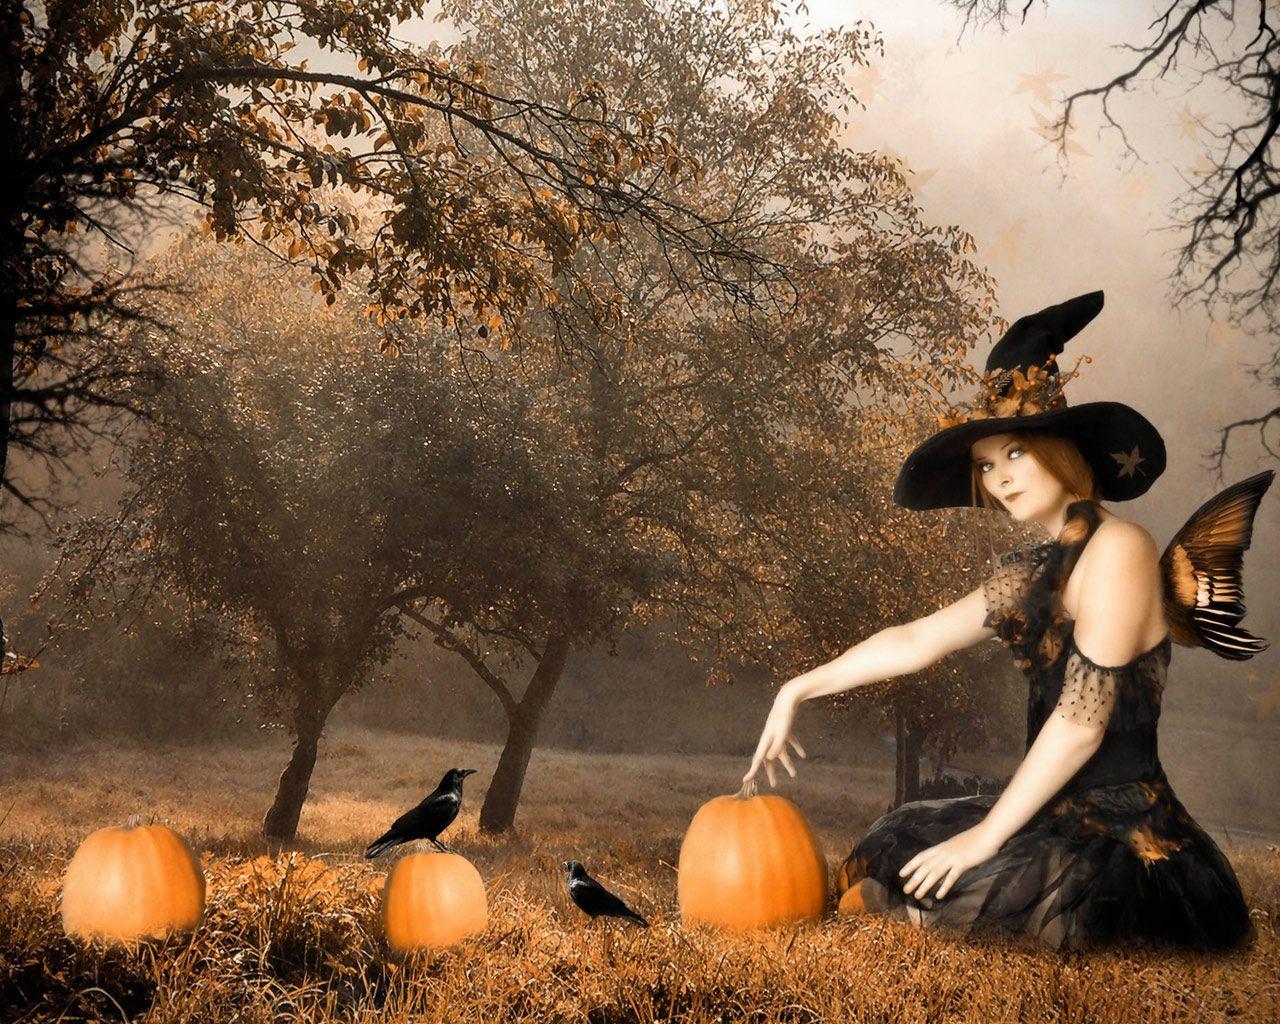 Desktop Wallpaper S > Fantasy > All Hallows Eve Witch